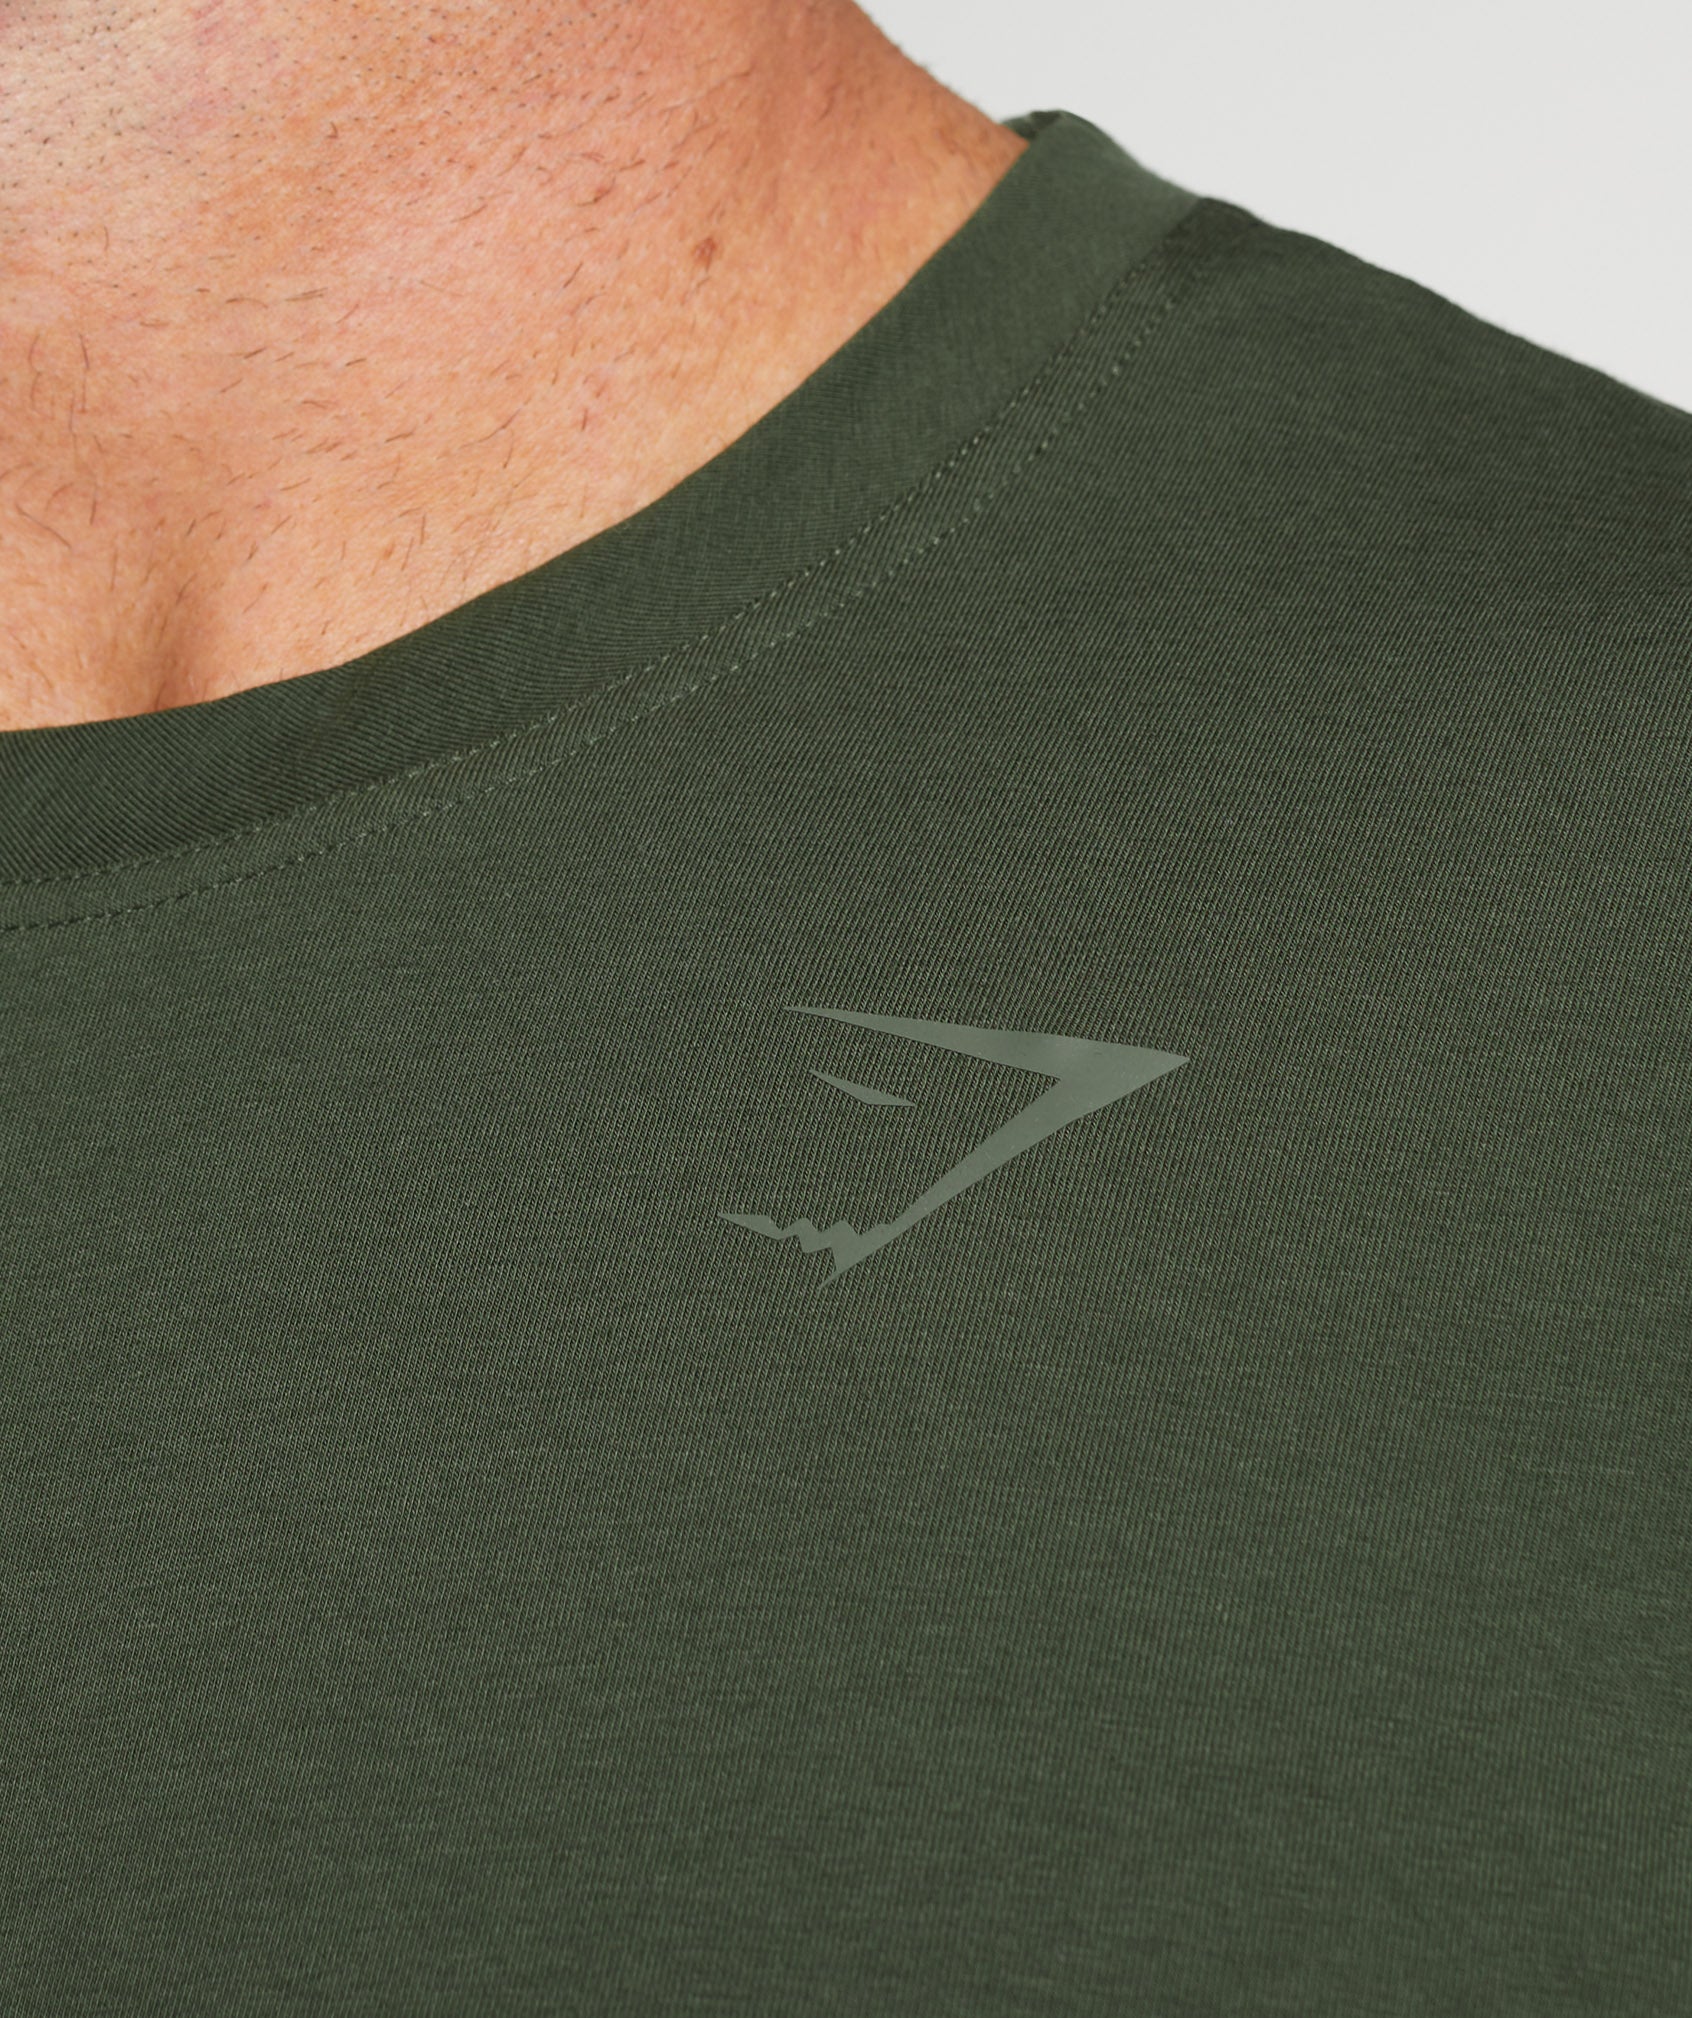 Power T-Shirt in Moss Olive - view 6